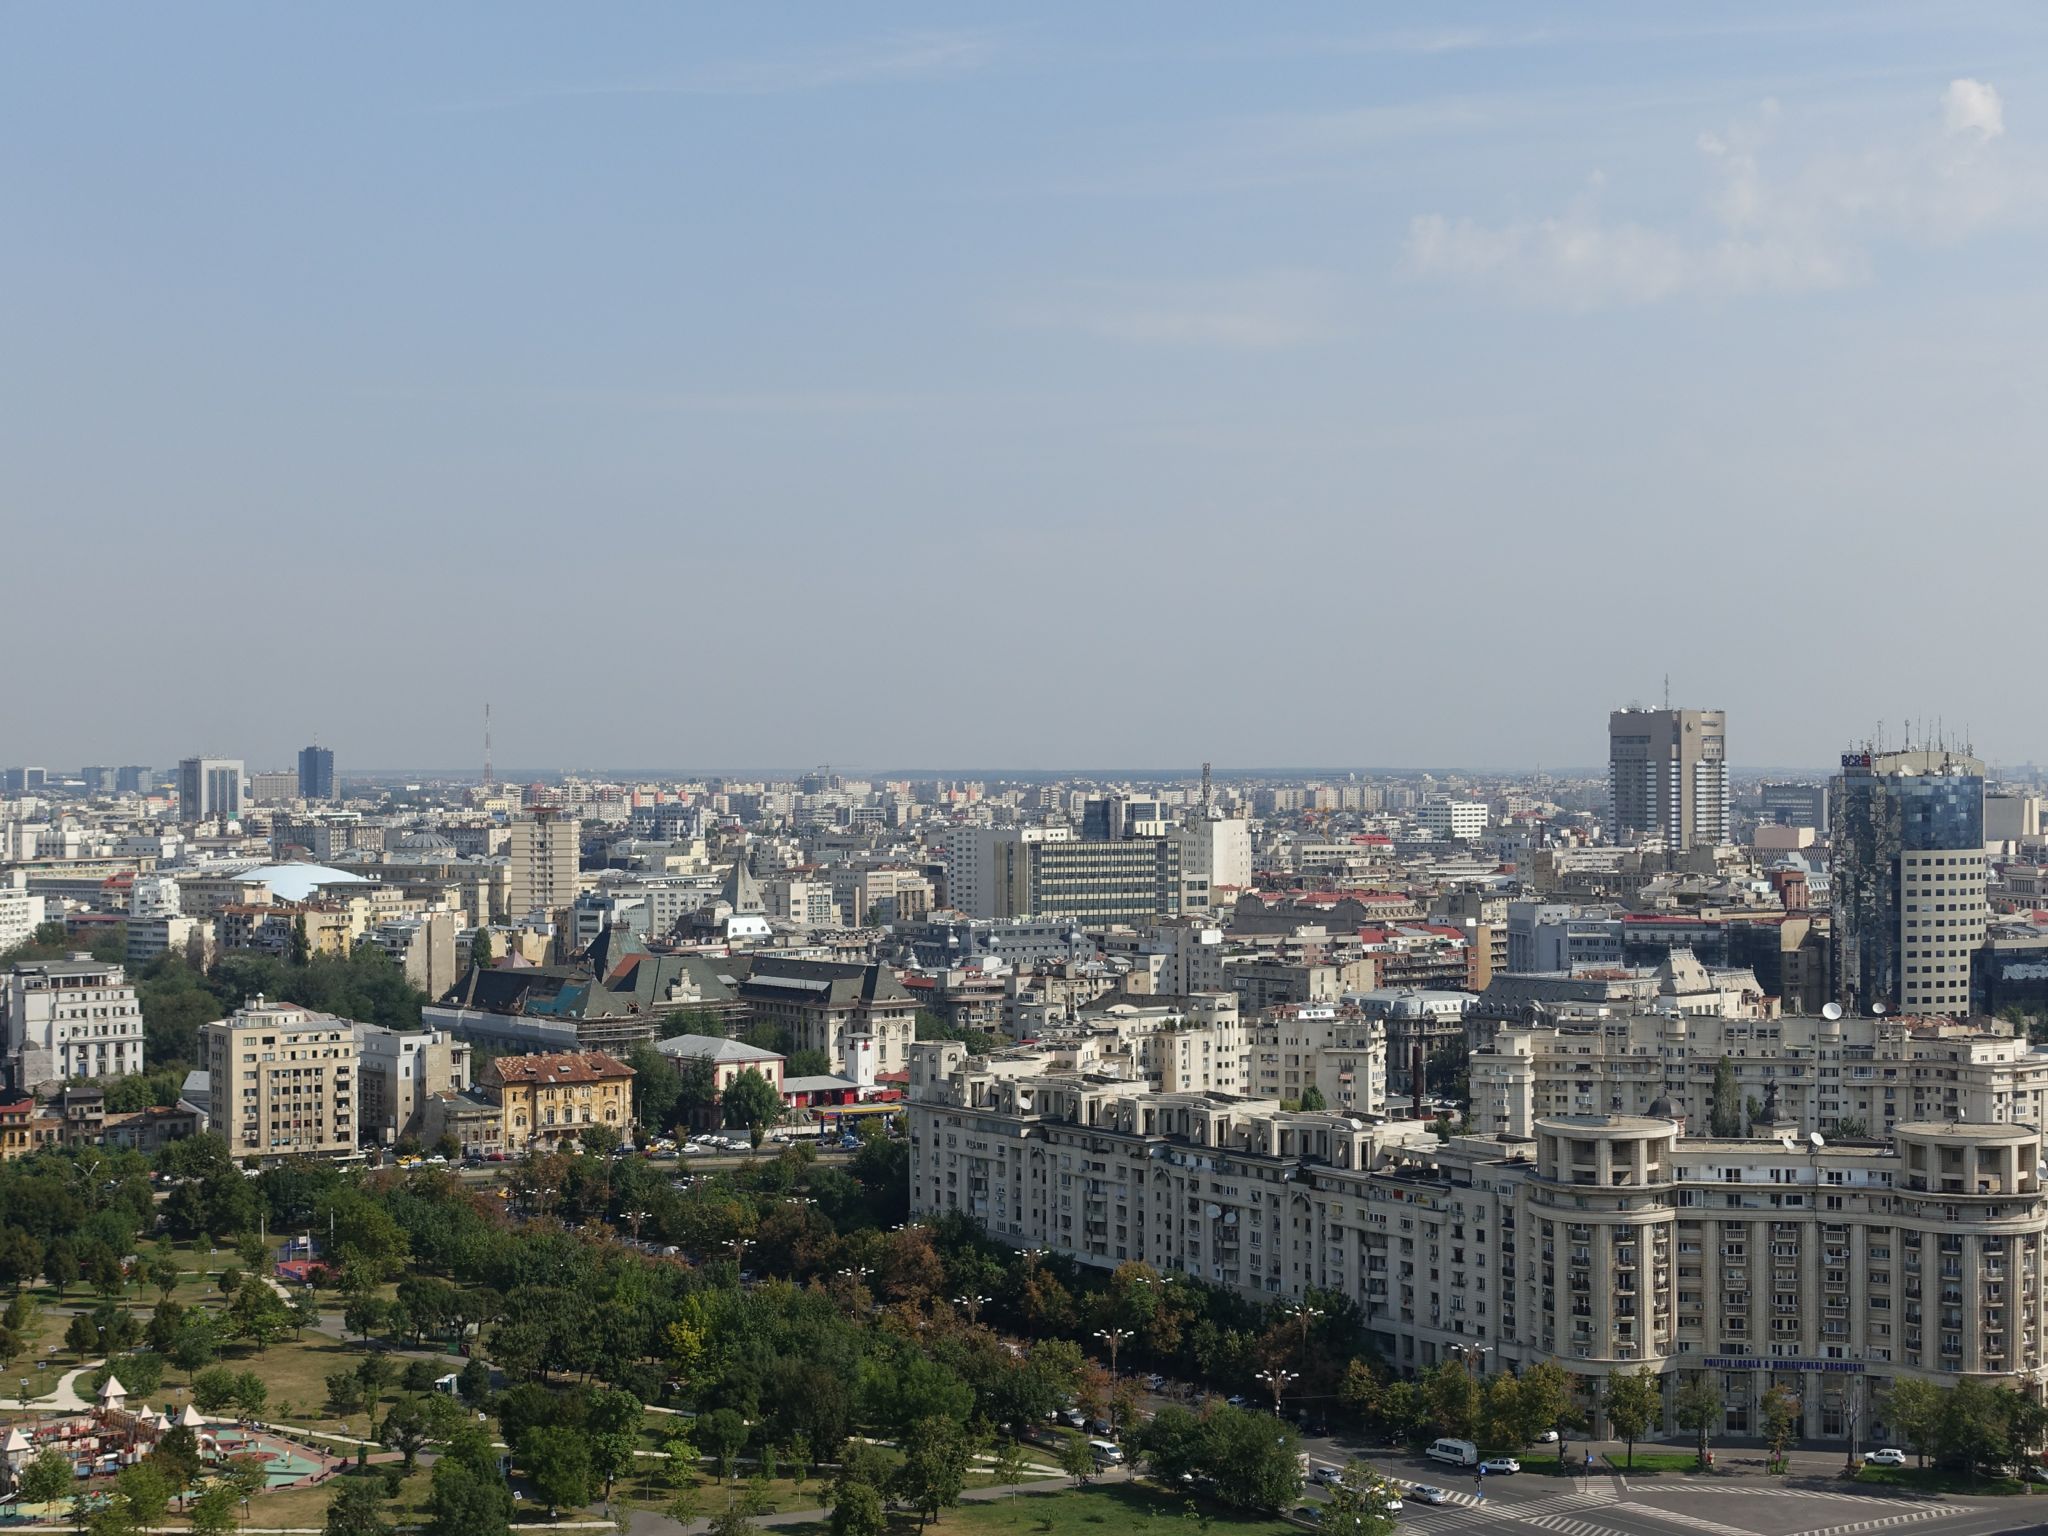 Photo 50 of 133 from the album Highlights Bucharest 2014.